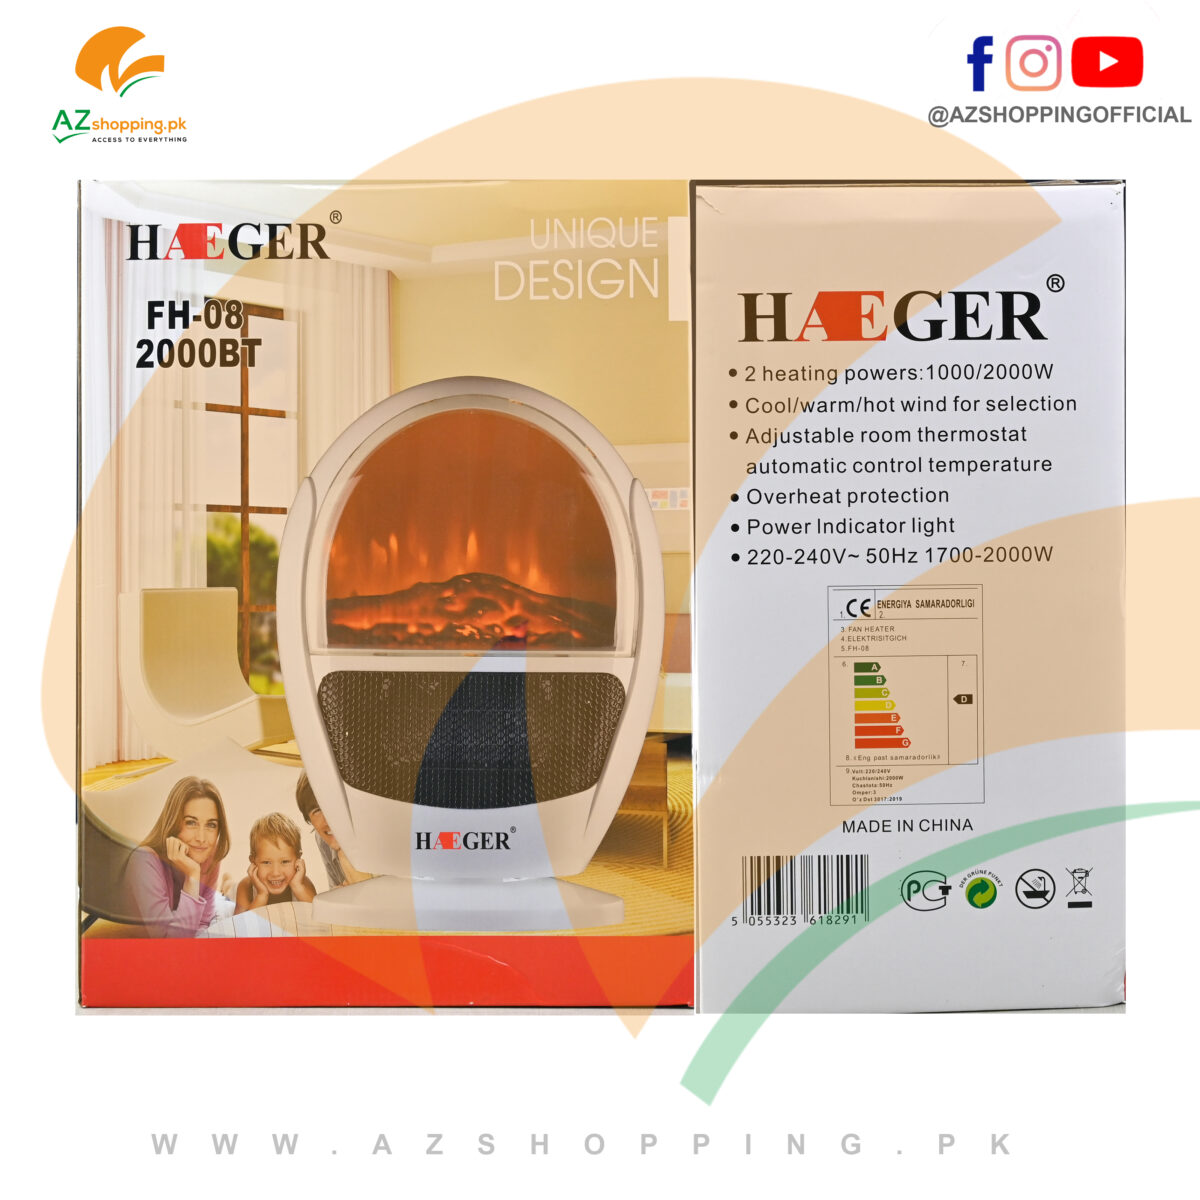 Haeger – Electric Vertical Fan Heater 1000W/2000W with Digital Flame Display - Model: FH-08 2000BT